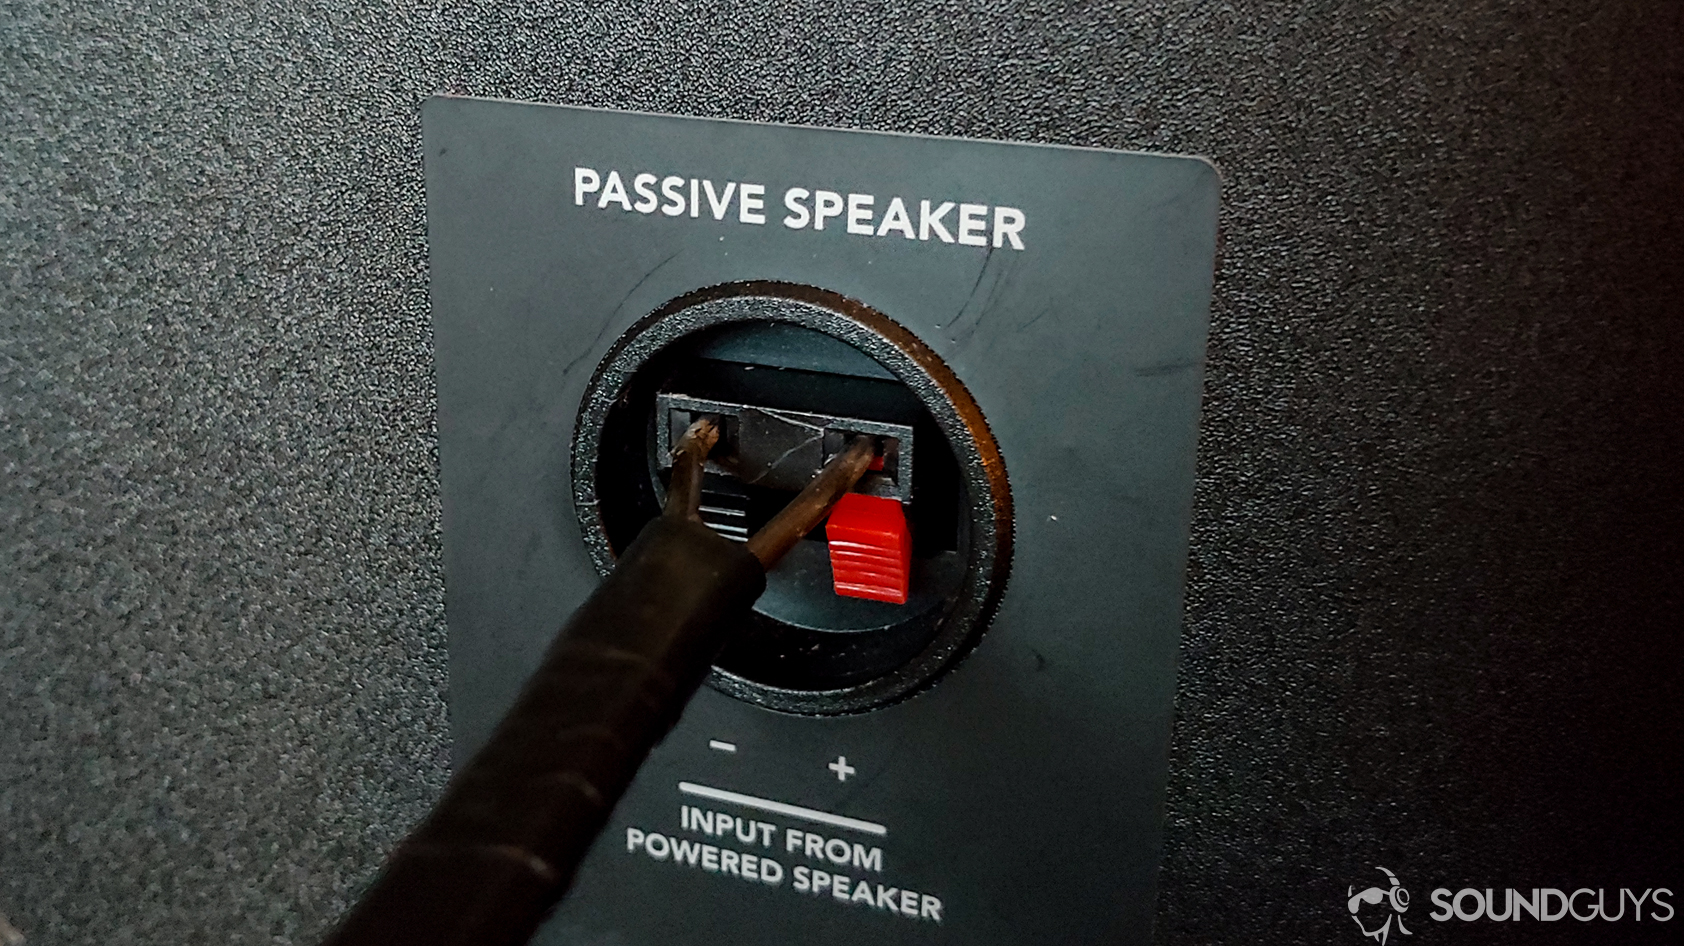 The coathanger speaker cable connected to an unpowered speaker.